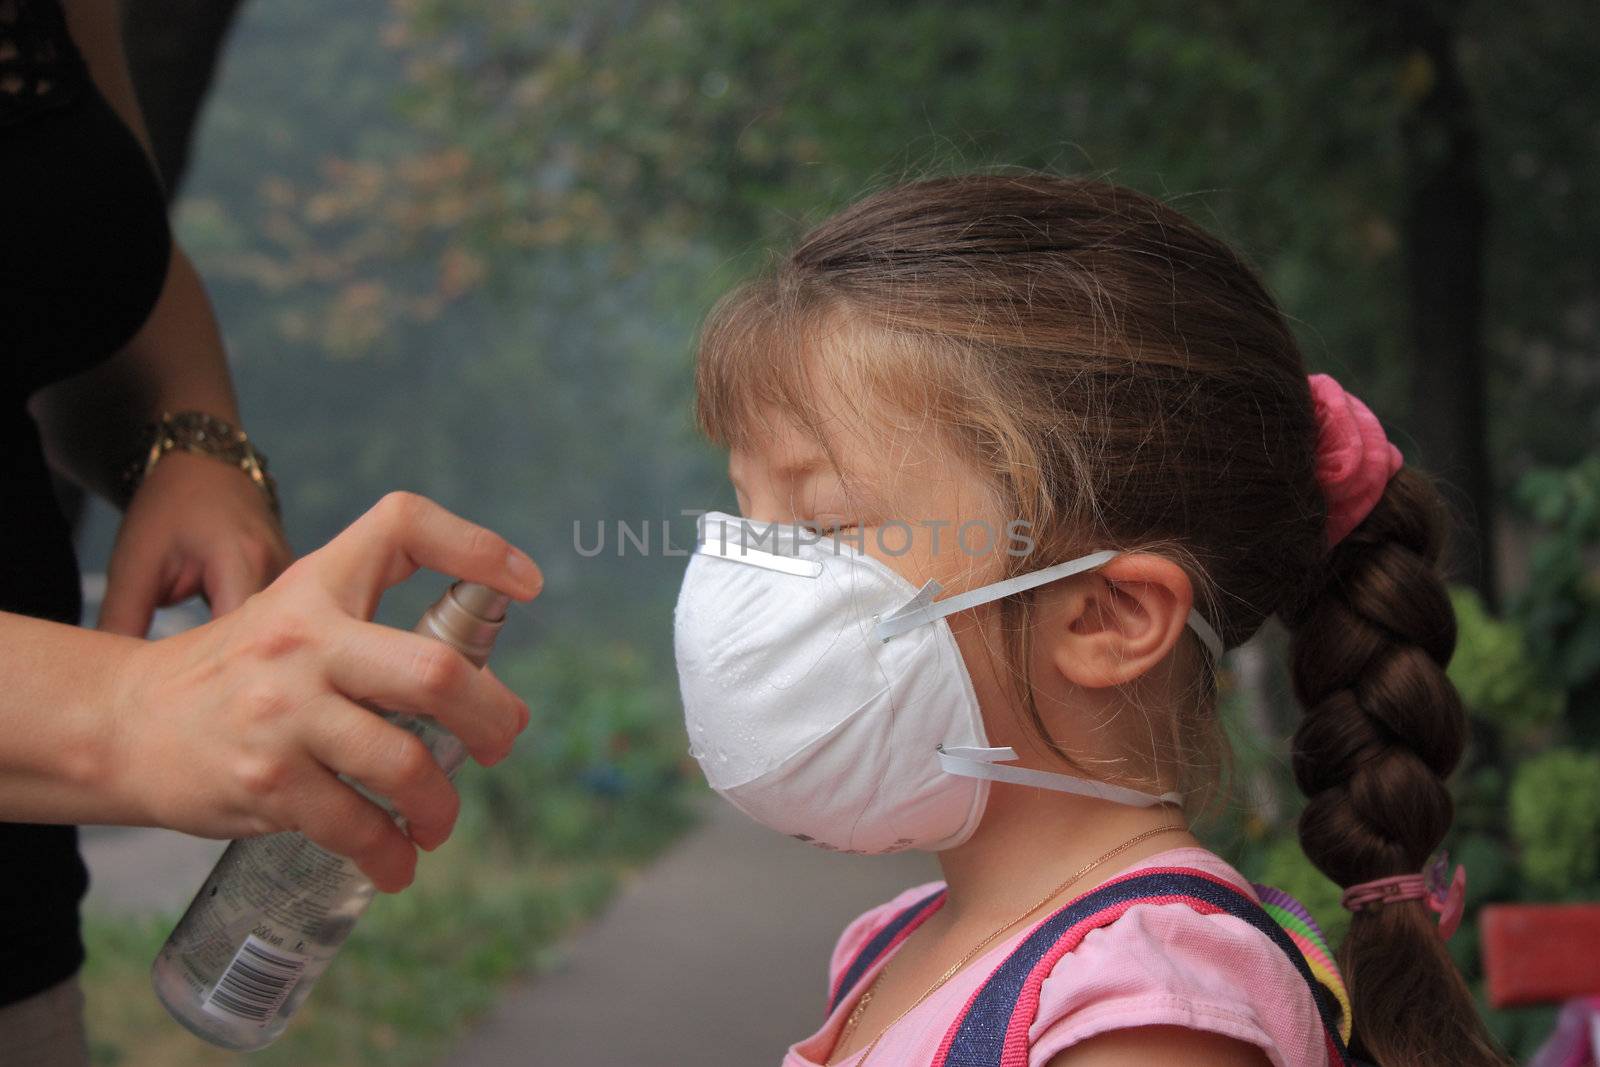 Wetted breathing mask On the little girl